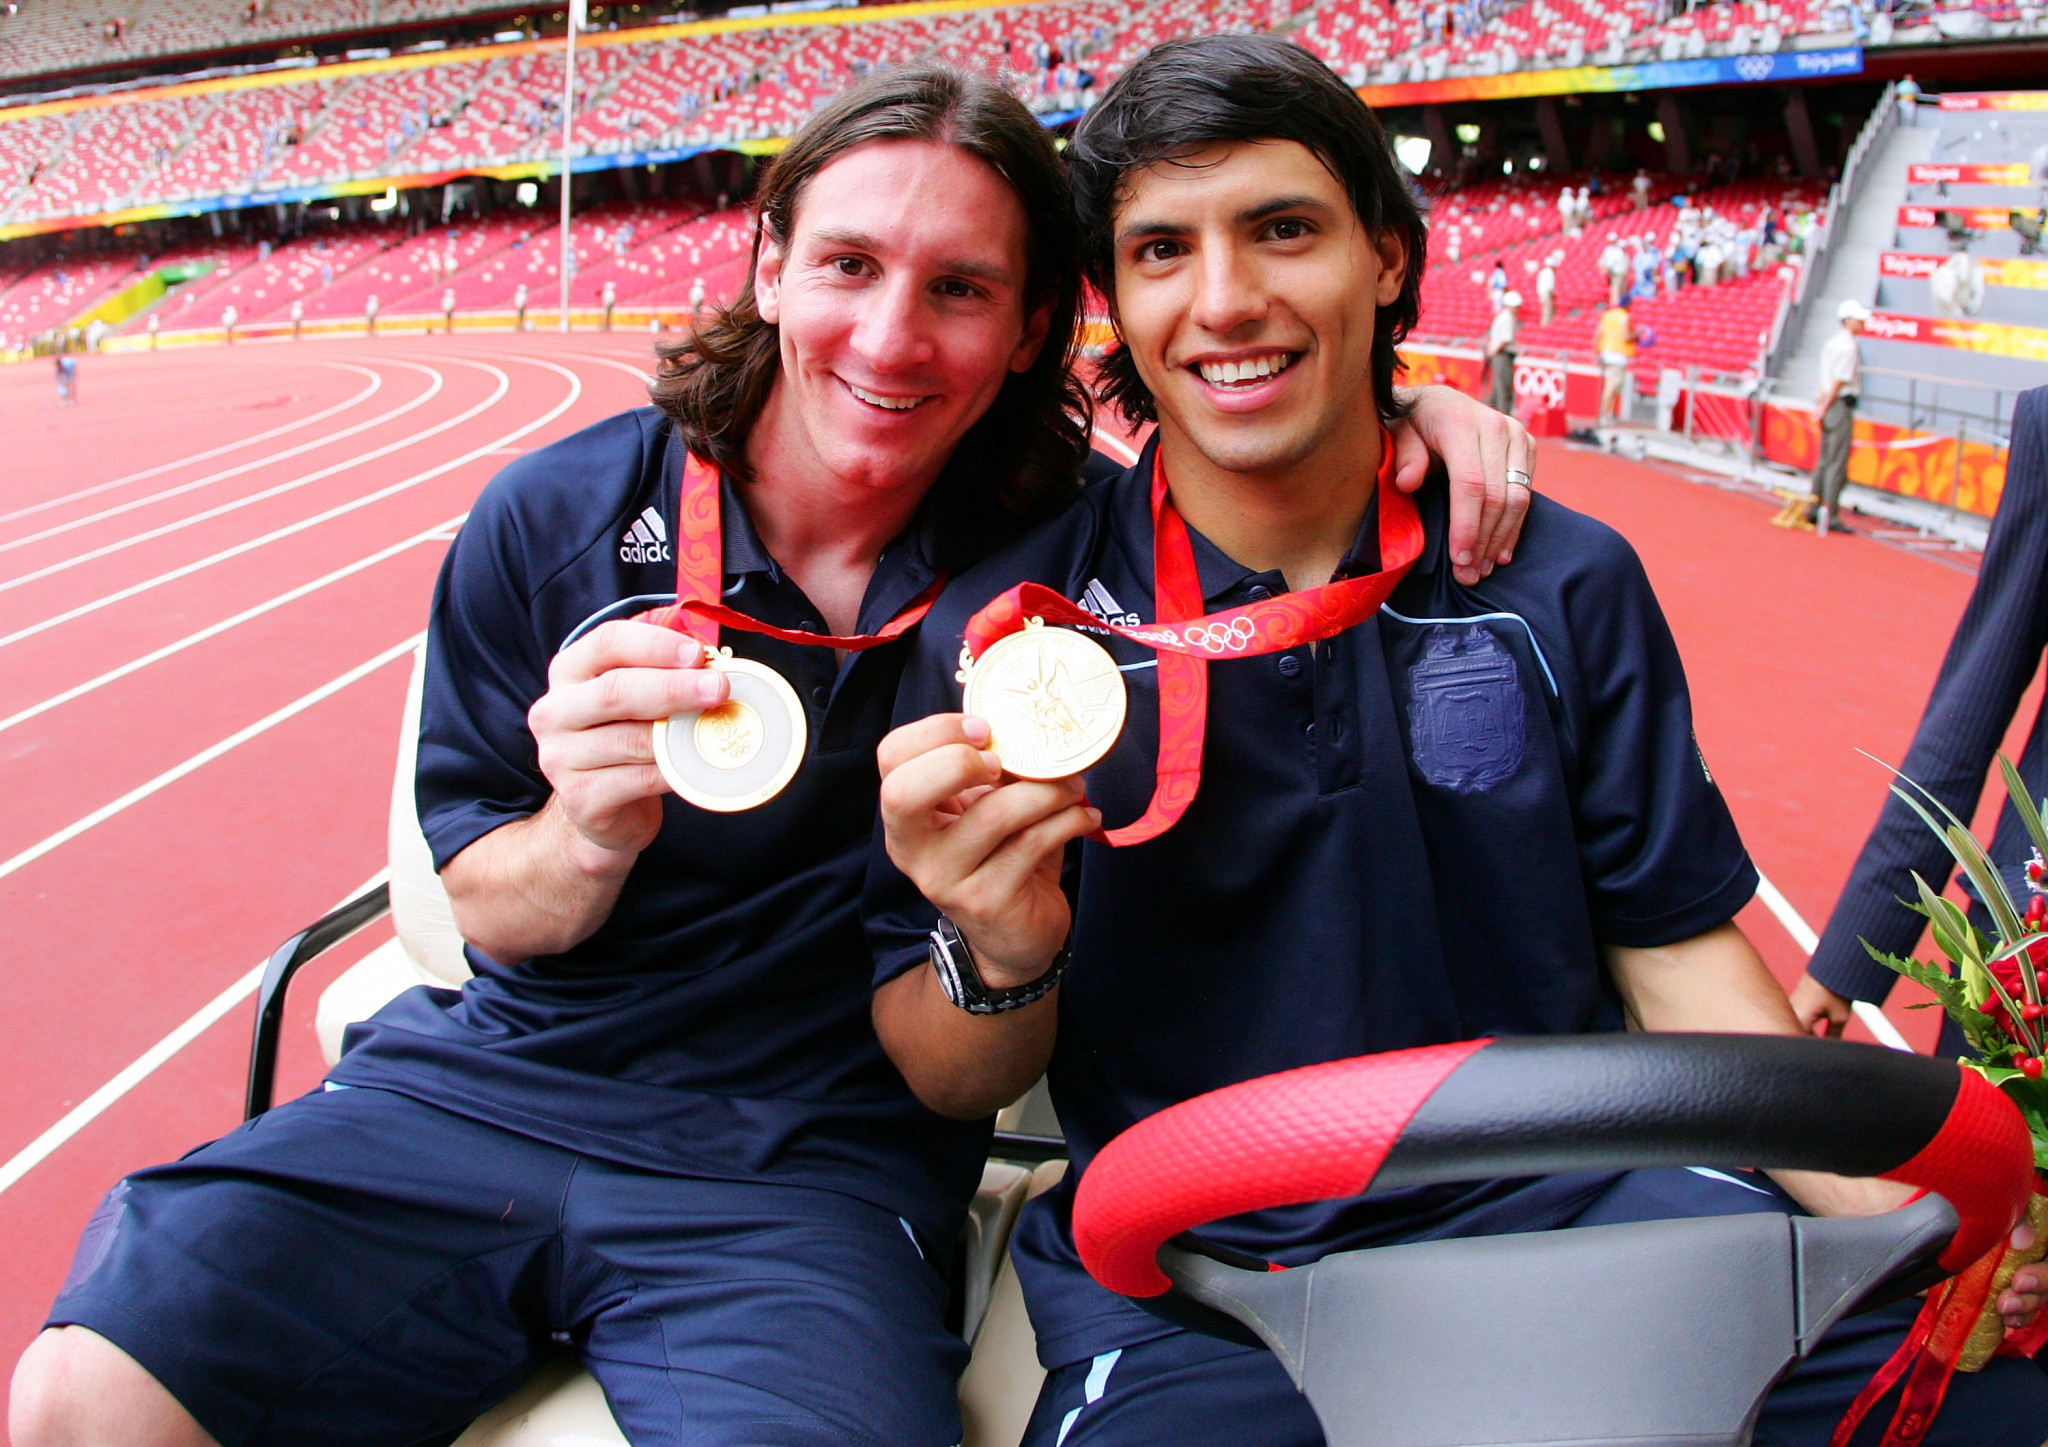 Messi previously got his hands on a gold medal at the 2008 Olympic Games in Beijing. GETTY IMAGES